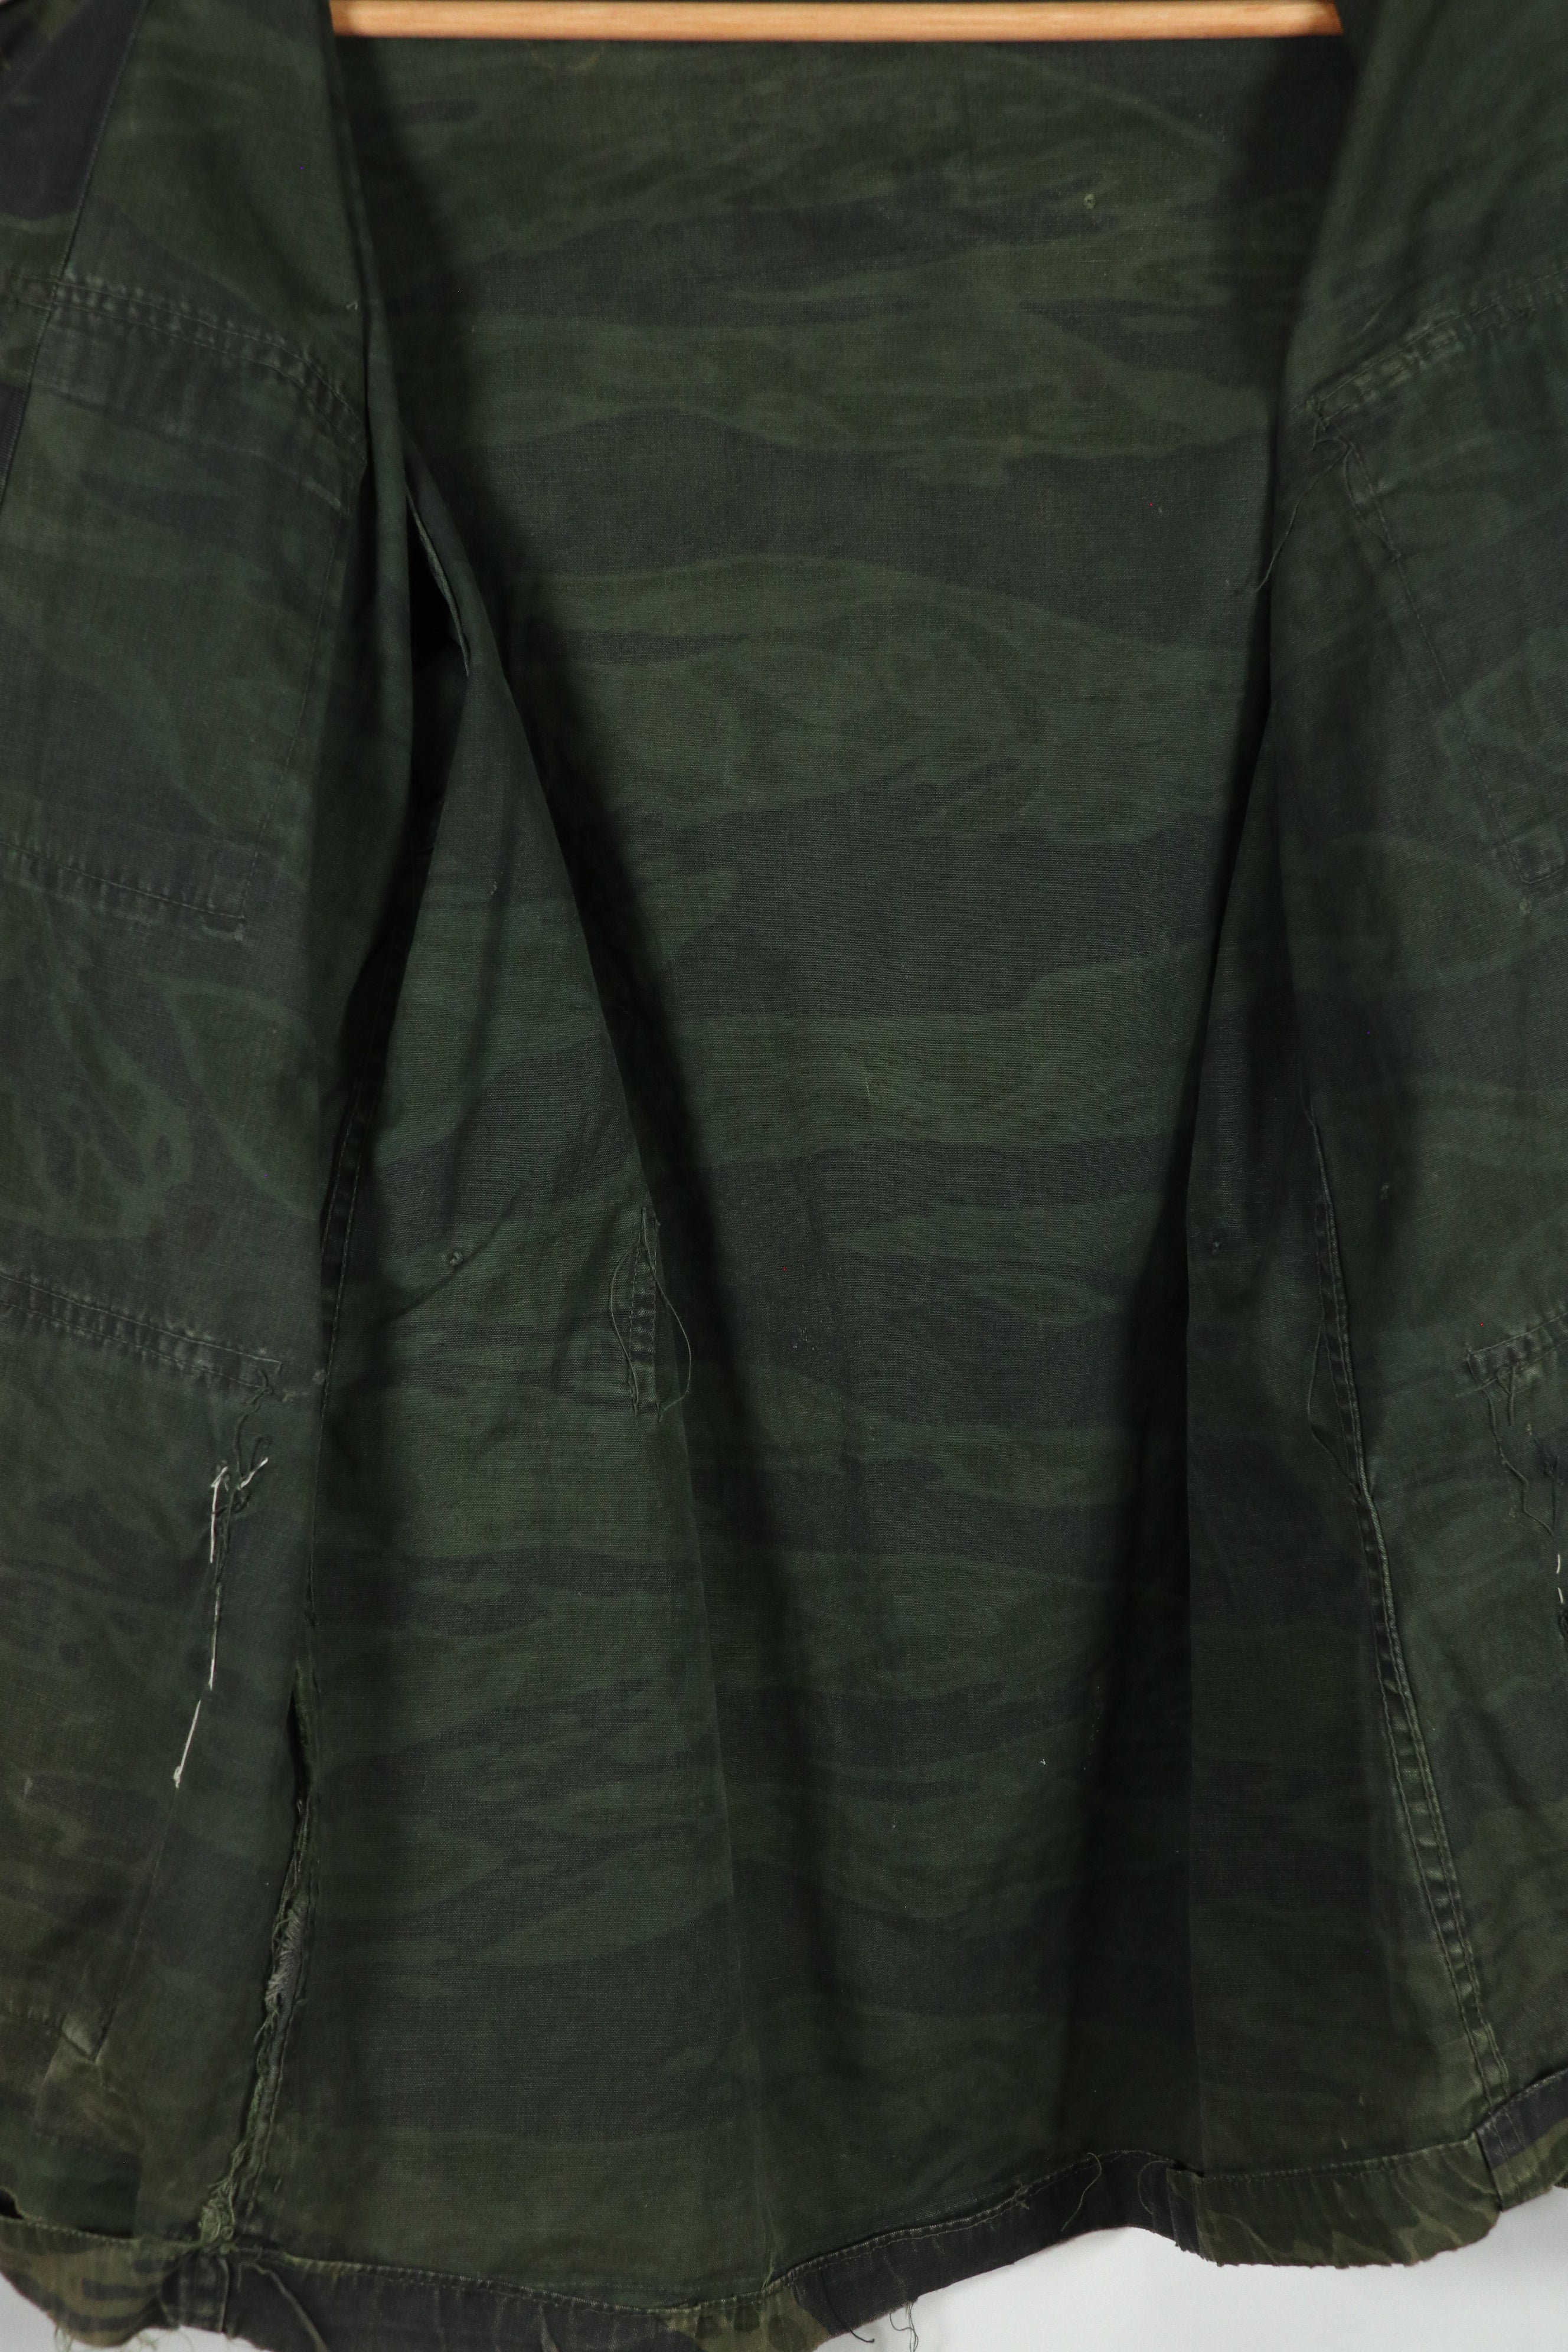 Real 1970s Late War Tiger Stripe Jacket, used, black dyed.